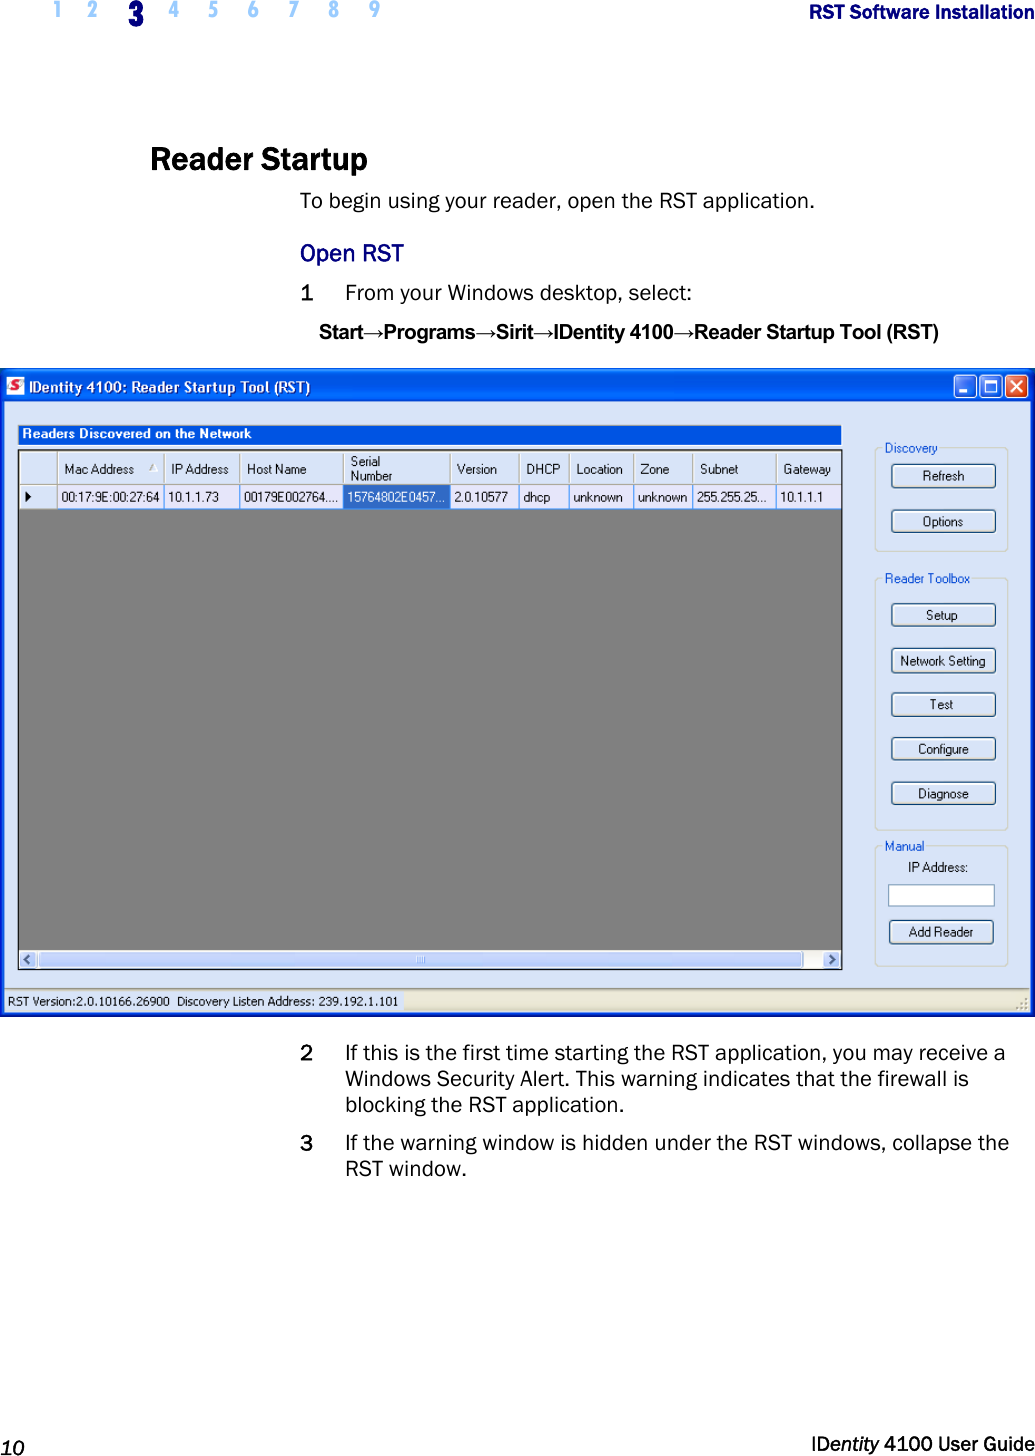  1 2 3 4 5 6 7 8 9       RST Software Installation   10  IDentity 4100 User Guide  Reader Startup To begin using your reader, open the RST application.  Open RST 1 From your Windows desktop, select: Start→Programs→Sirit→IDentity 4100→Reader Startup Tool (RST)  2 If this is the first time starting the RST application, you may receive a Windows Security Alert. This warning indicates that the firewall is blocking the RST application.  3 If the warning window is hidden under the RST windows, collapse the RST window. 